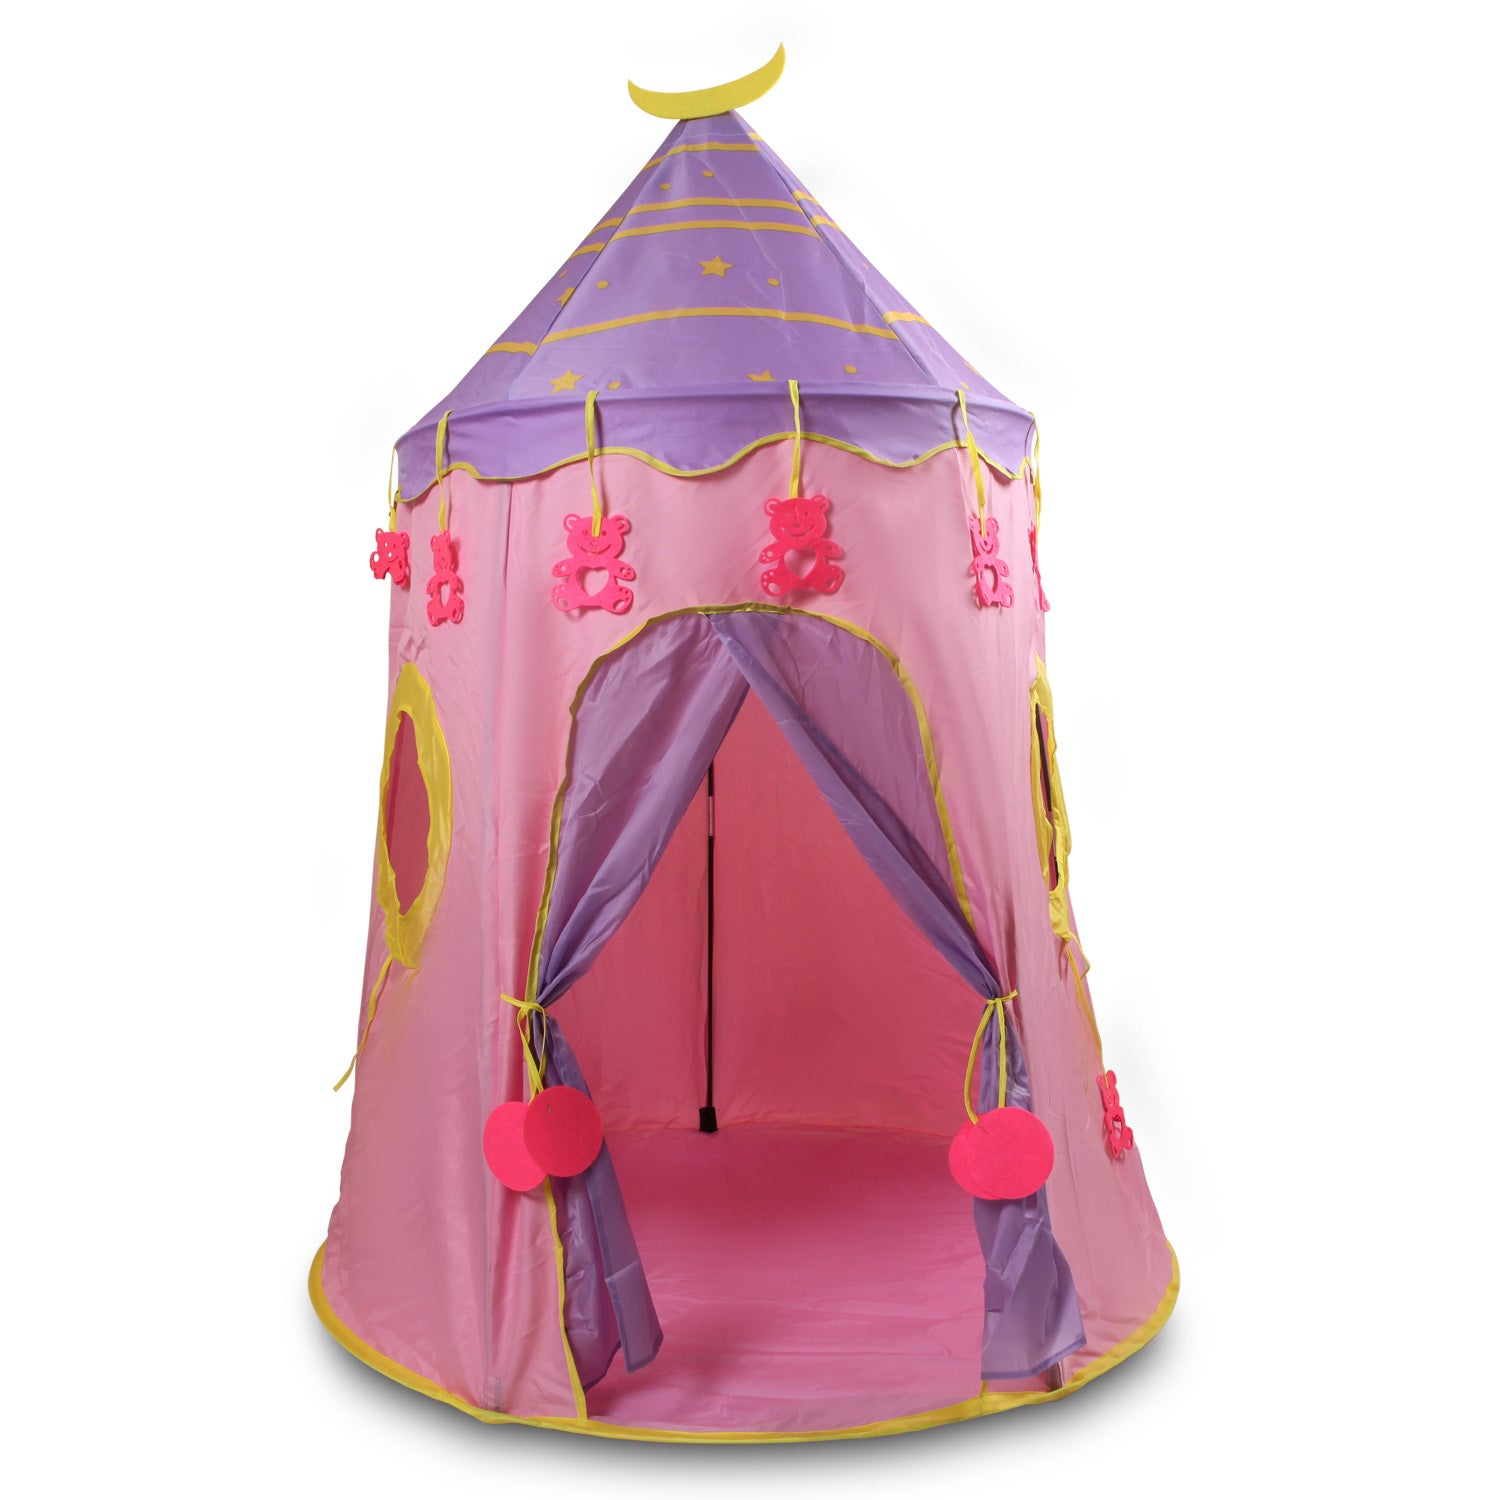 Playtime Foldable Tent House Star Teddy - Pink